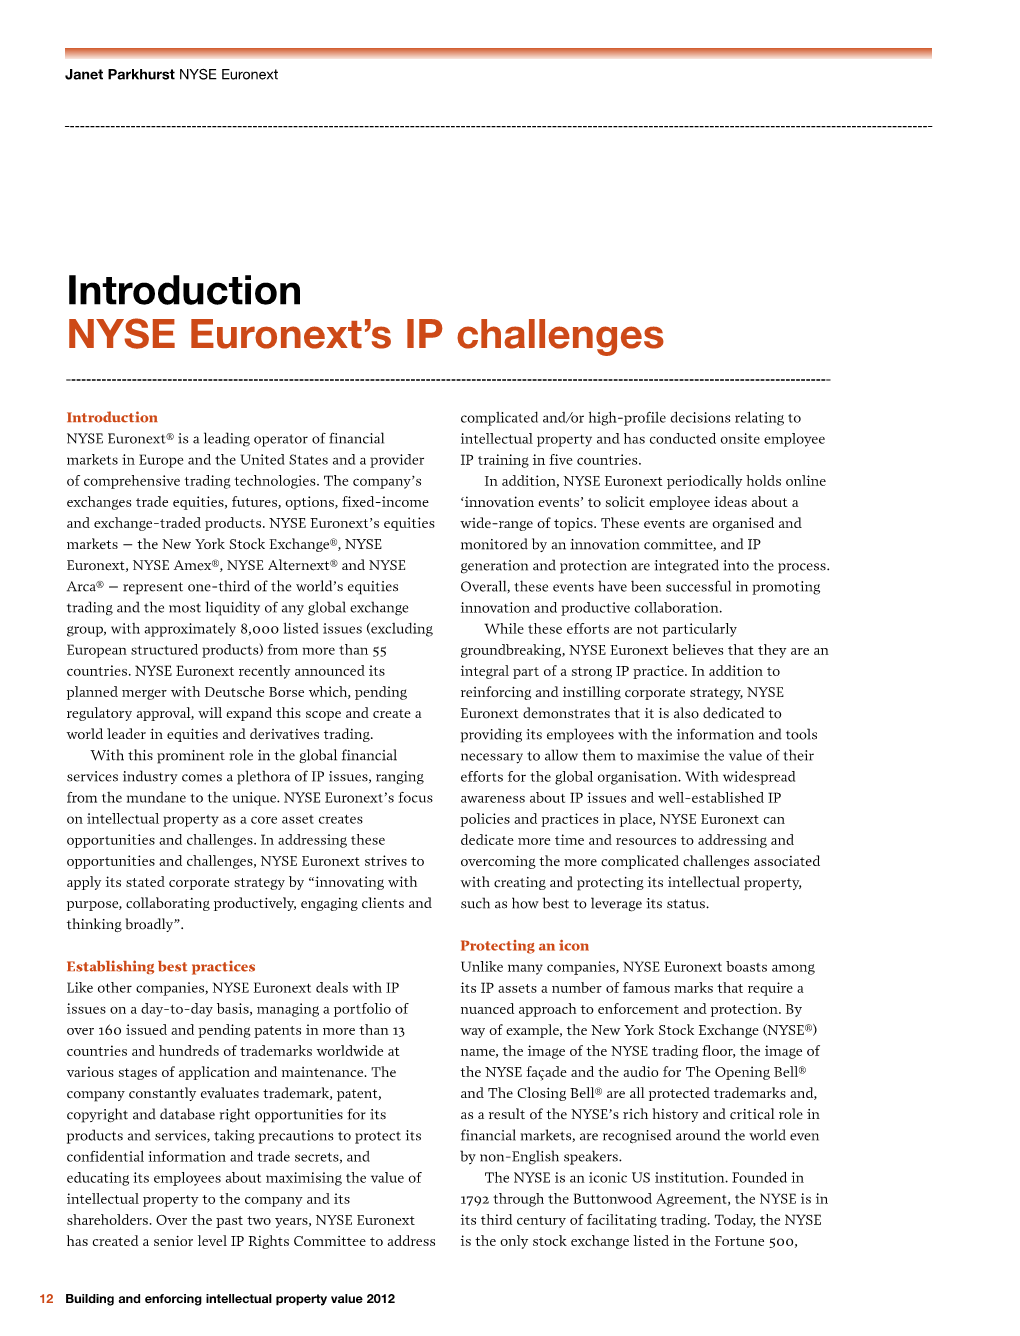 Introduction NYSE Euronext's IP Challenges